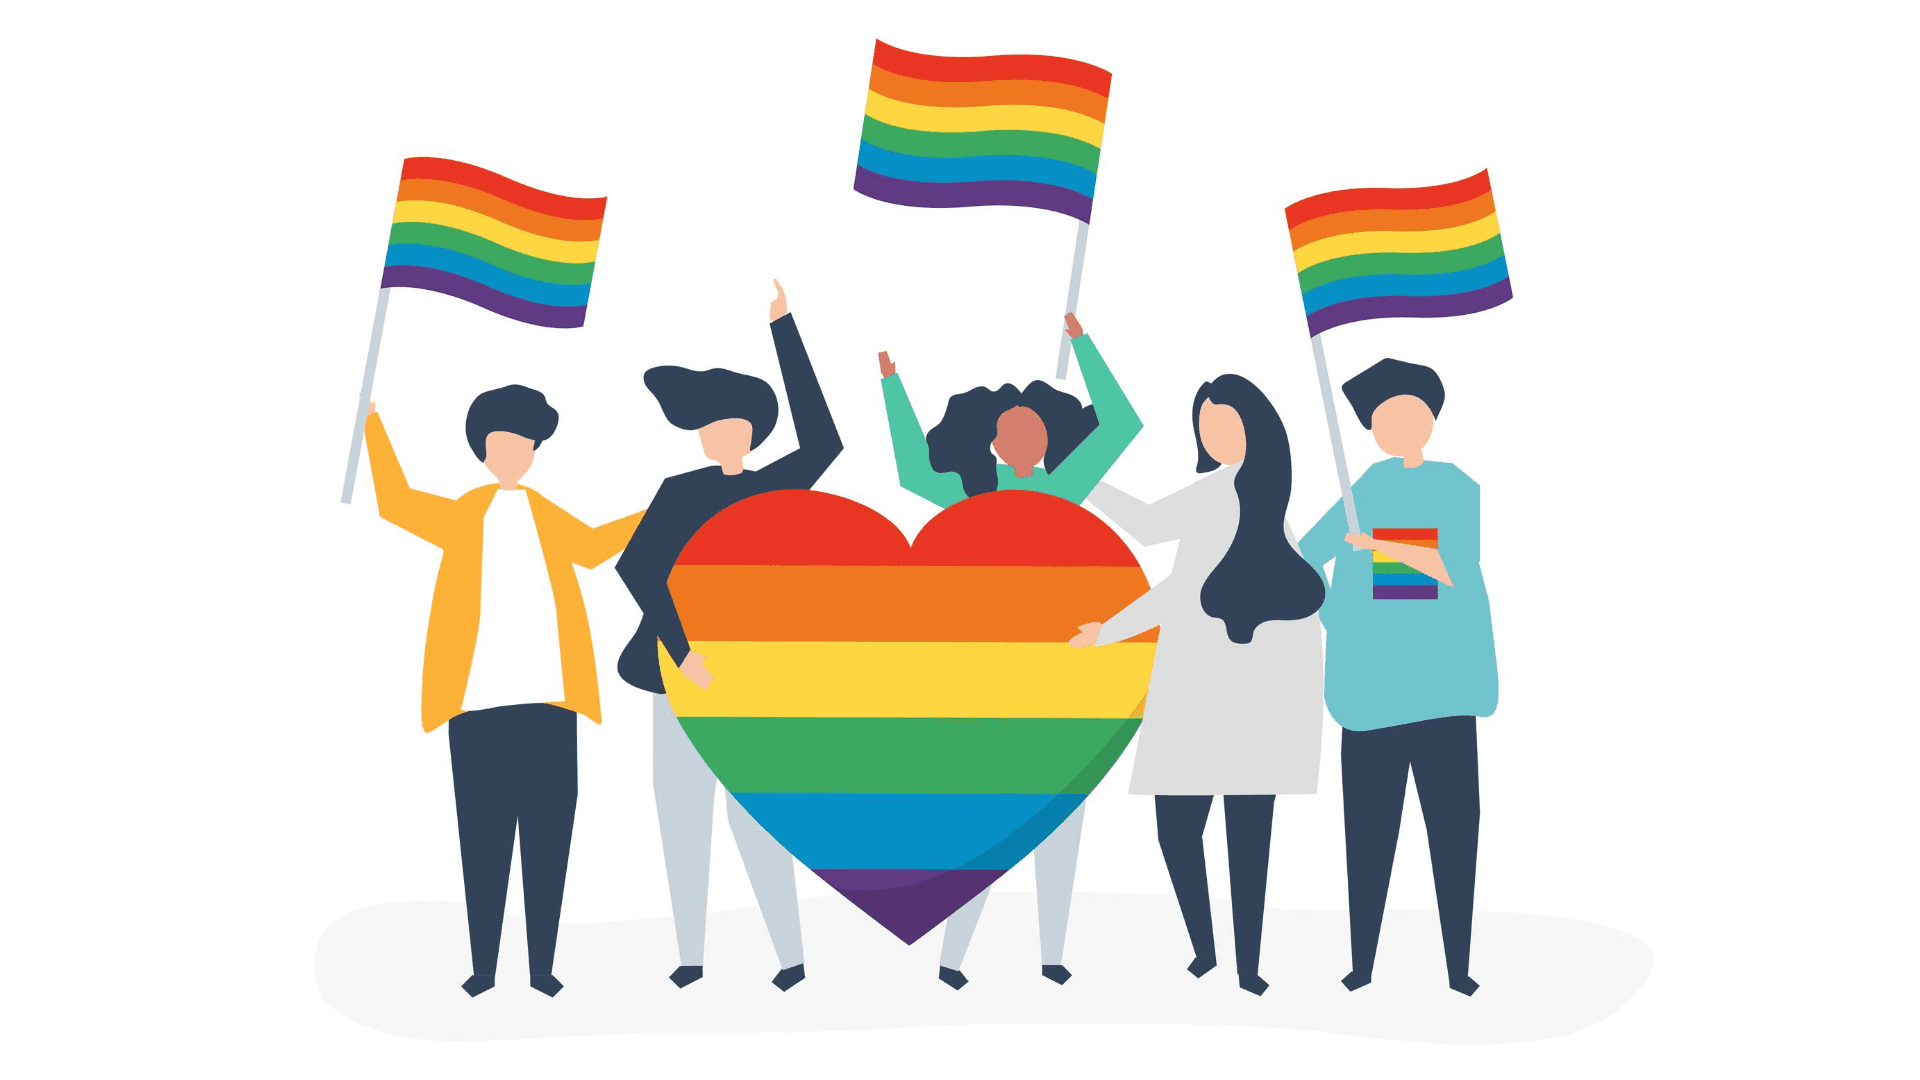 Animation of people holding rainbow coloured flags and a ranbow coloured heart in support of th LGBTQ community